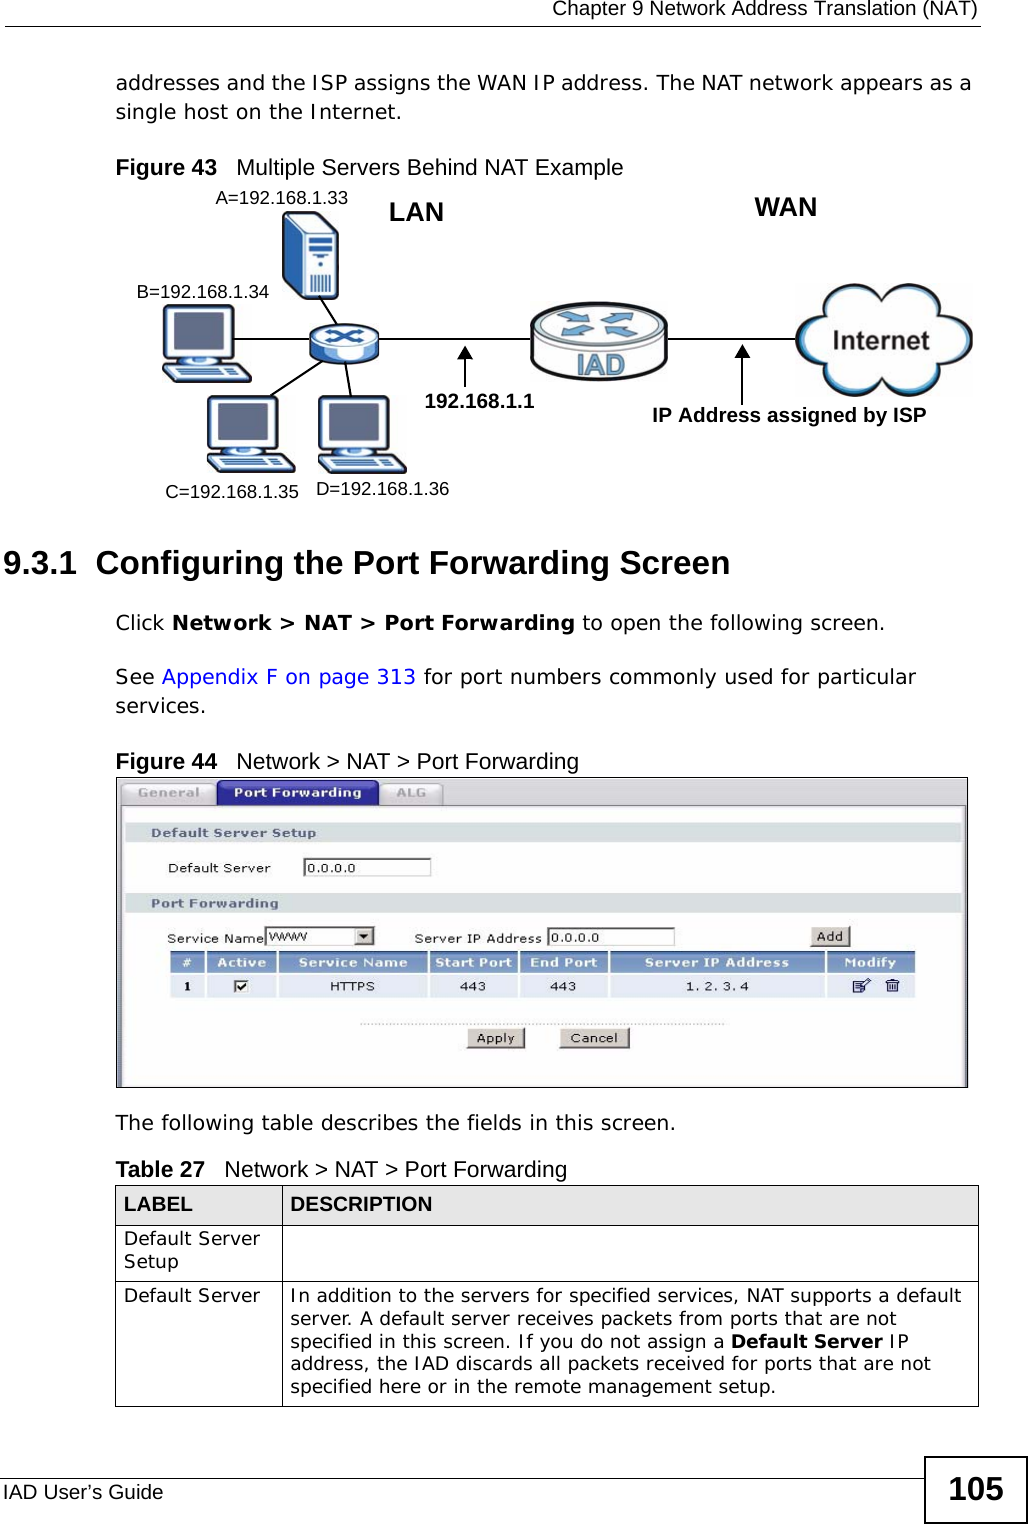  Chapter 9 Network Address Translation (NAT)IAD User’s Guide 105addresses and the ISP assigns the WAN IP address. The NAT network appears as a single host on the Internet.Figure 43   Multiple Servers Behind NAT Example9.3.1  Configuring the Port Forwarding ScreenClick Network &gt; NAT &gt; Port Forwarding to open the following screen.See Appendix F on page 313 for port numbers commonly used for particular services. Figure 44   Network &gt; NAT &gt; Port ForwardingThe following table describes the fields in this screen. A=192.168.1.33D=192.168.1.36C=192.168.1.35B=192.168.1.34WANLAN192.168.1.1 IP Address assigned by ISPTable 27   Network &gt; NAT &gt; Port ForwardingLABEL DESCRIPTIONDefault Server SetupDefault Server In addition to the servers for specified services, NAT supports a default server. A default server receives packets from ports that are not specified in this screen. If you do not assign a Default Server IP address, the IAD discards all packets received for ports that are not specified here or in the remote management setup.